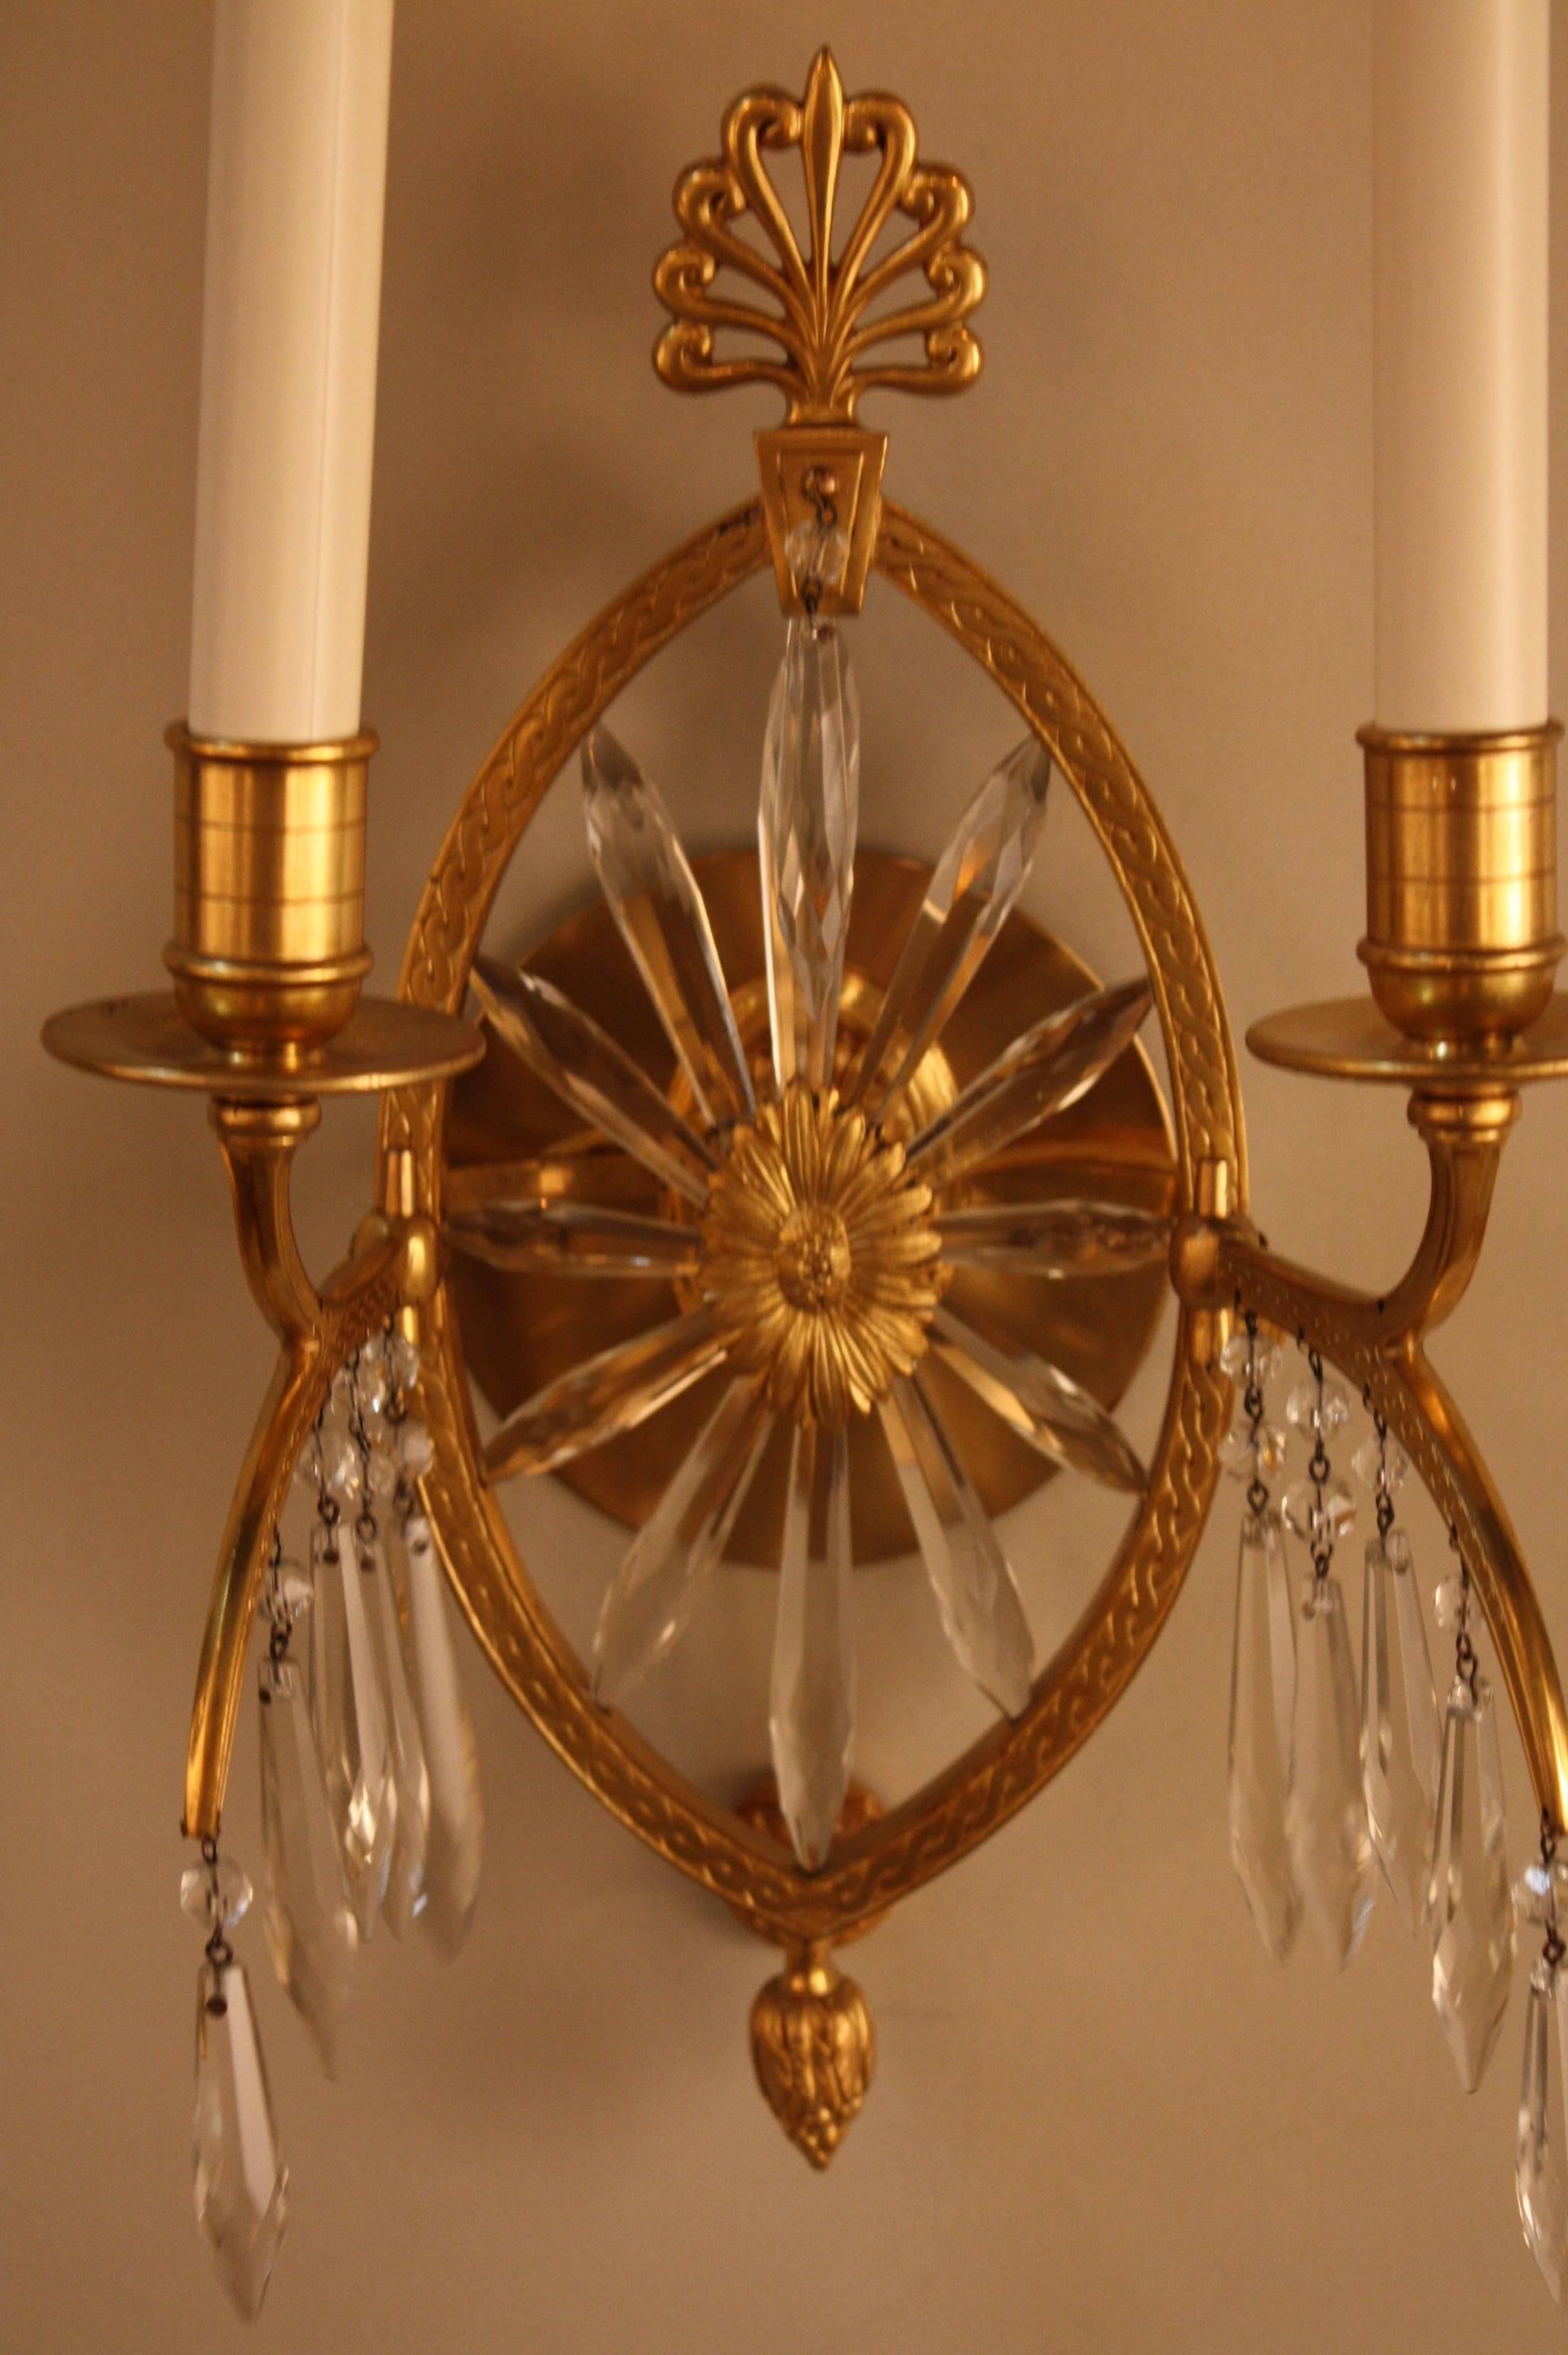 Fabulous set of three late 19th century sunburst crystal and bronze moveable arm piano sconces. they were attached on the piano with candle to illuminating the music note, but this elegant set of wall sconces have been electrified and modified with